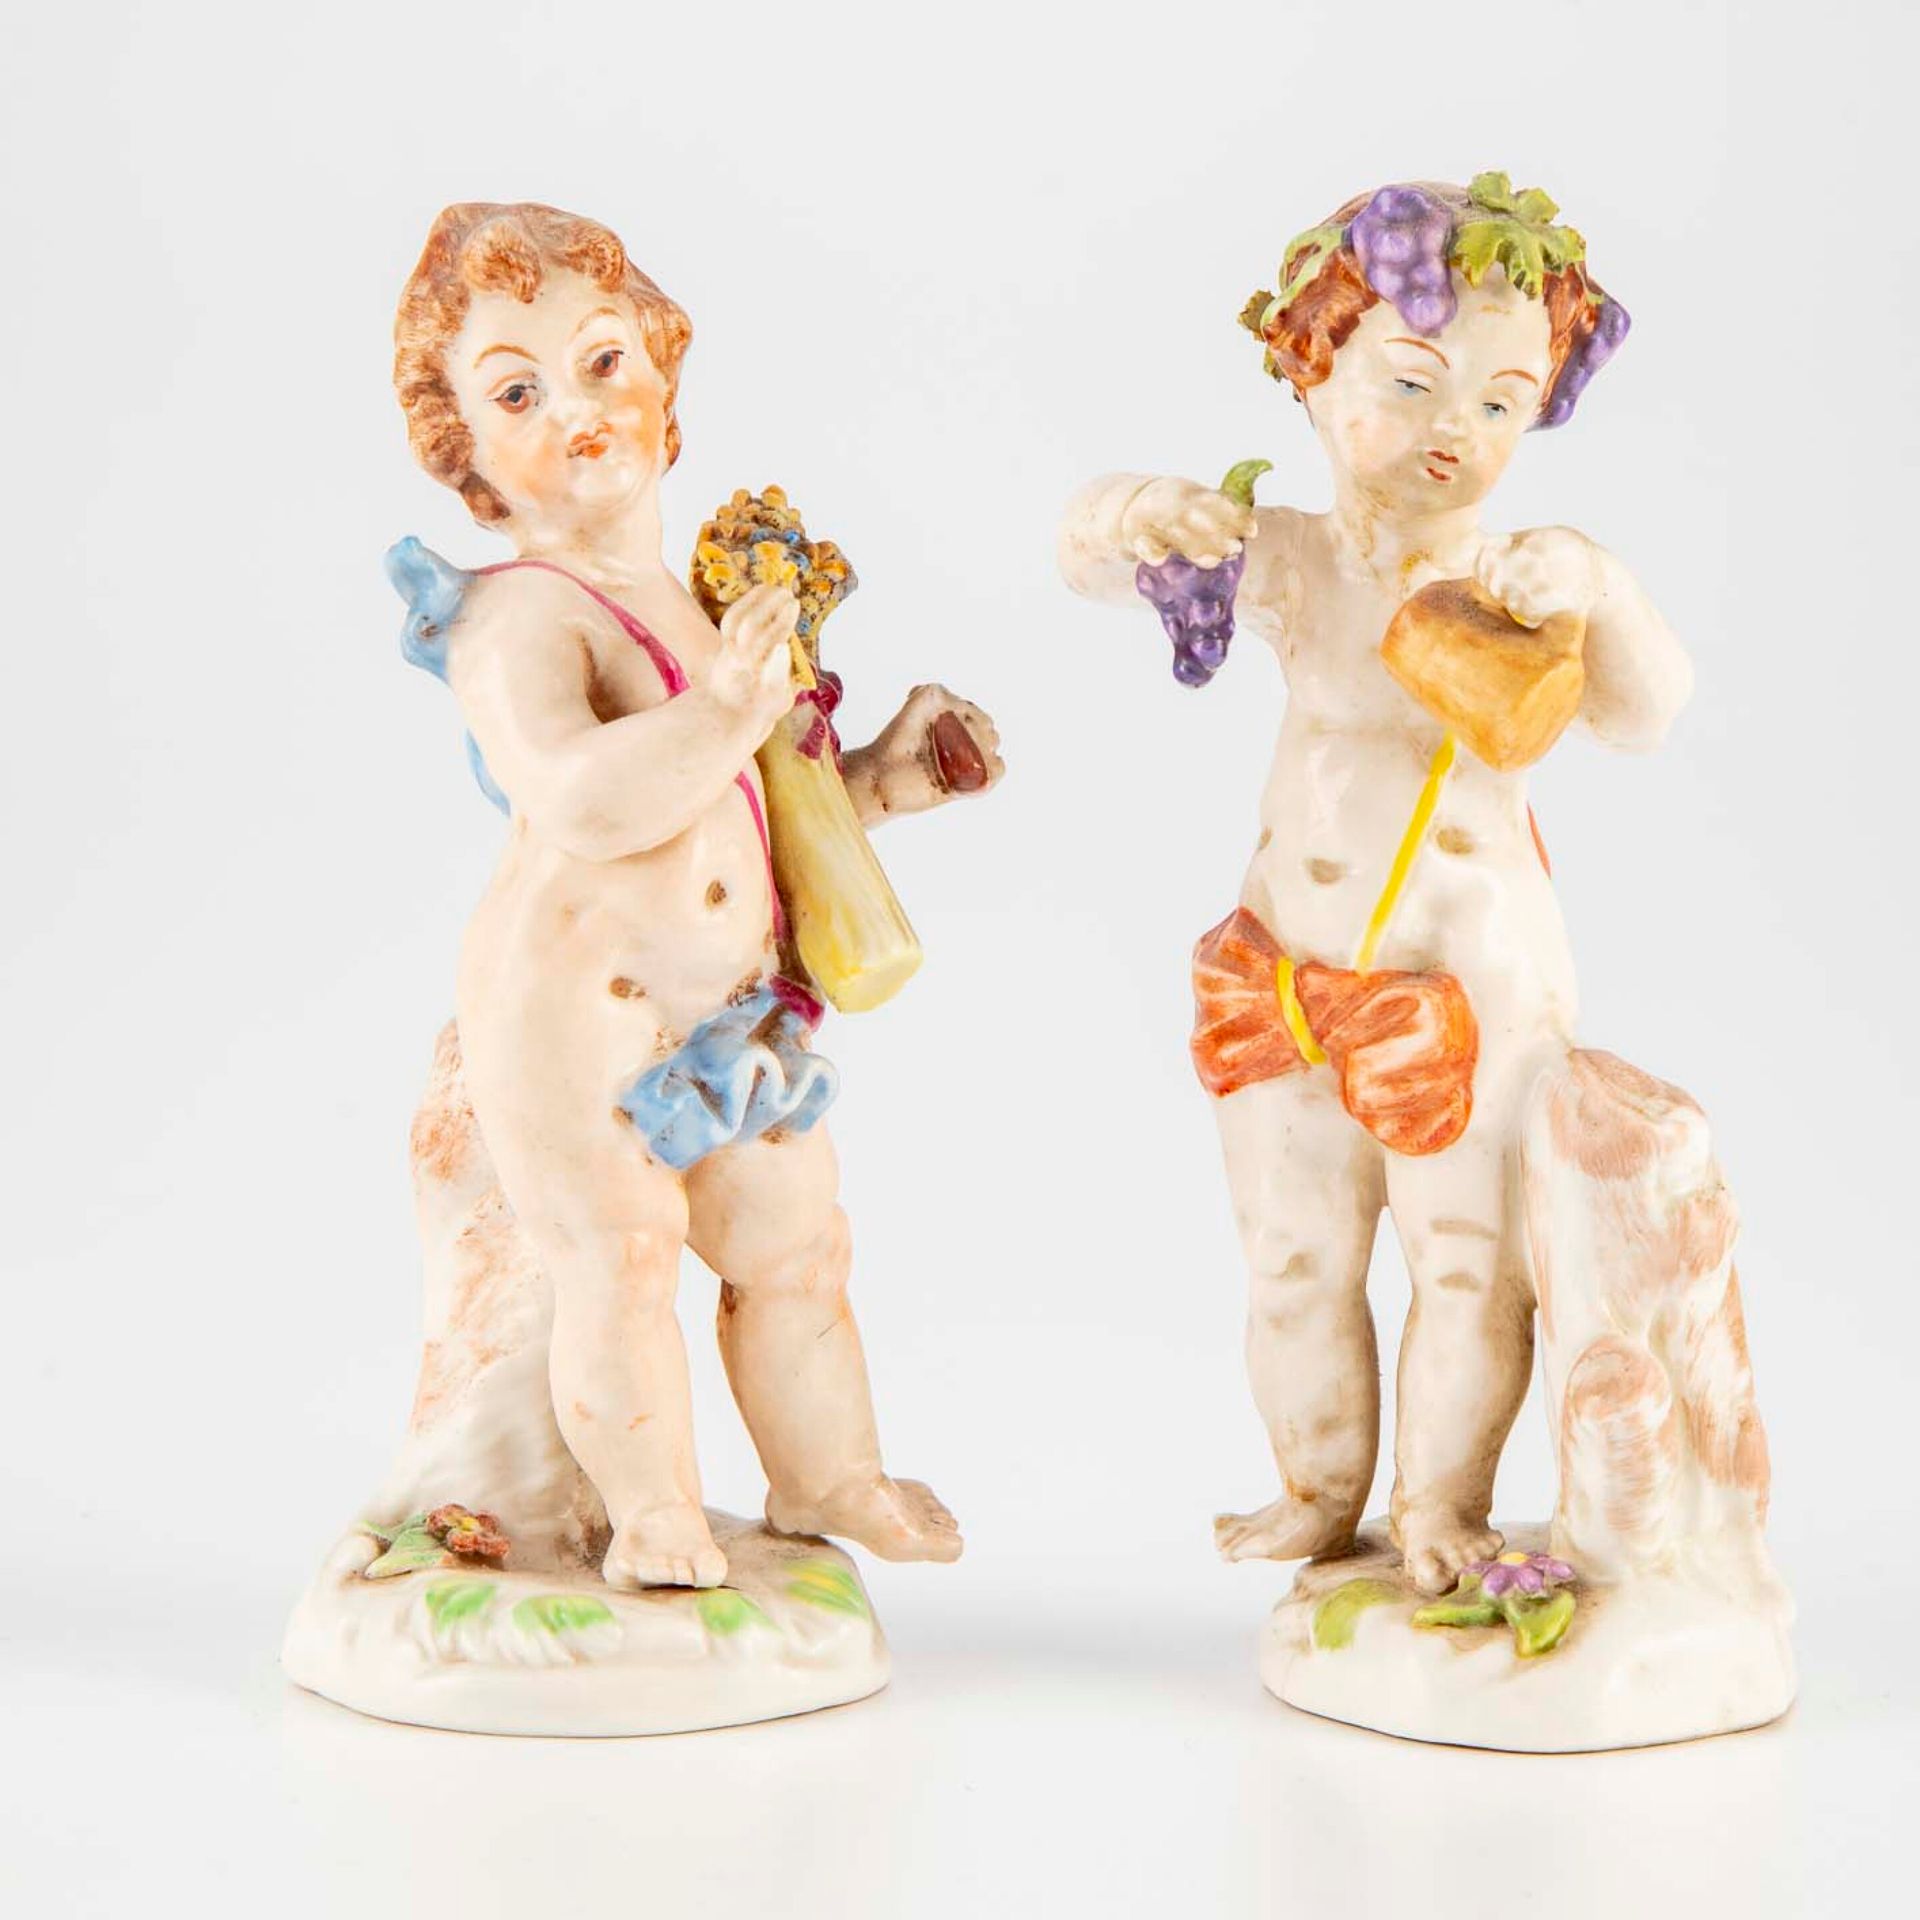 NAPLES NAPLES (kind of)

Two porcelain statuettes representing love allegories o&hellip;